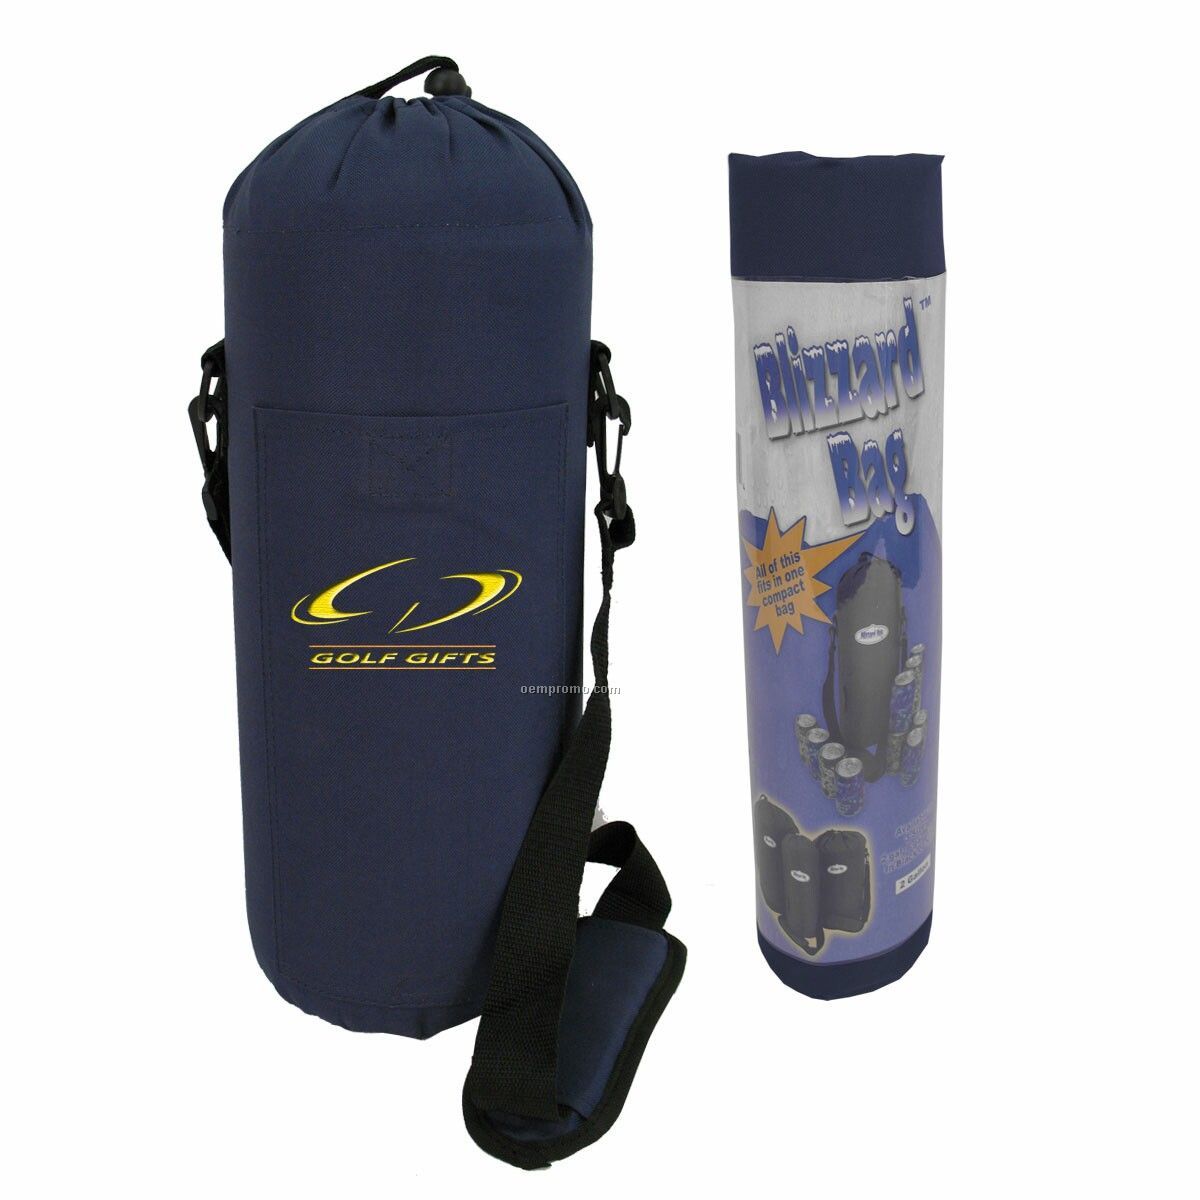 Blizzard Bag 2 Gallon Soft Cooler - Embroidery